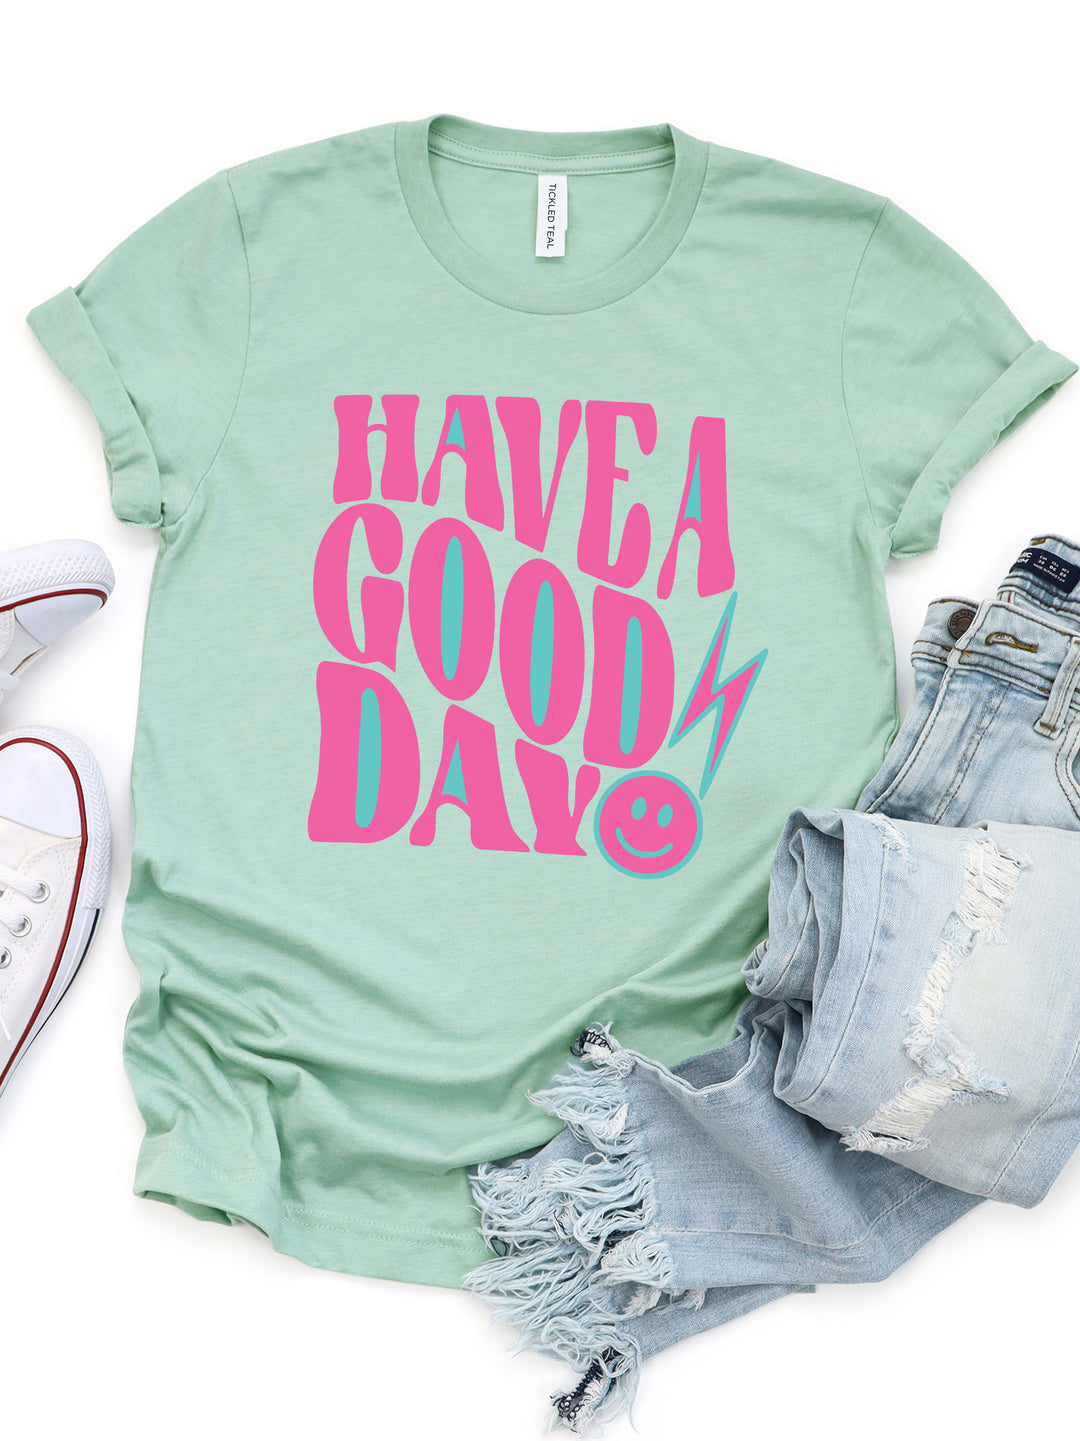 Have a Good Day Graphic Tee